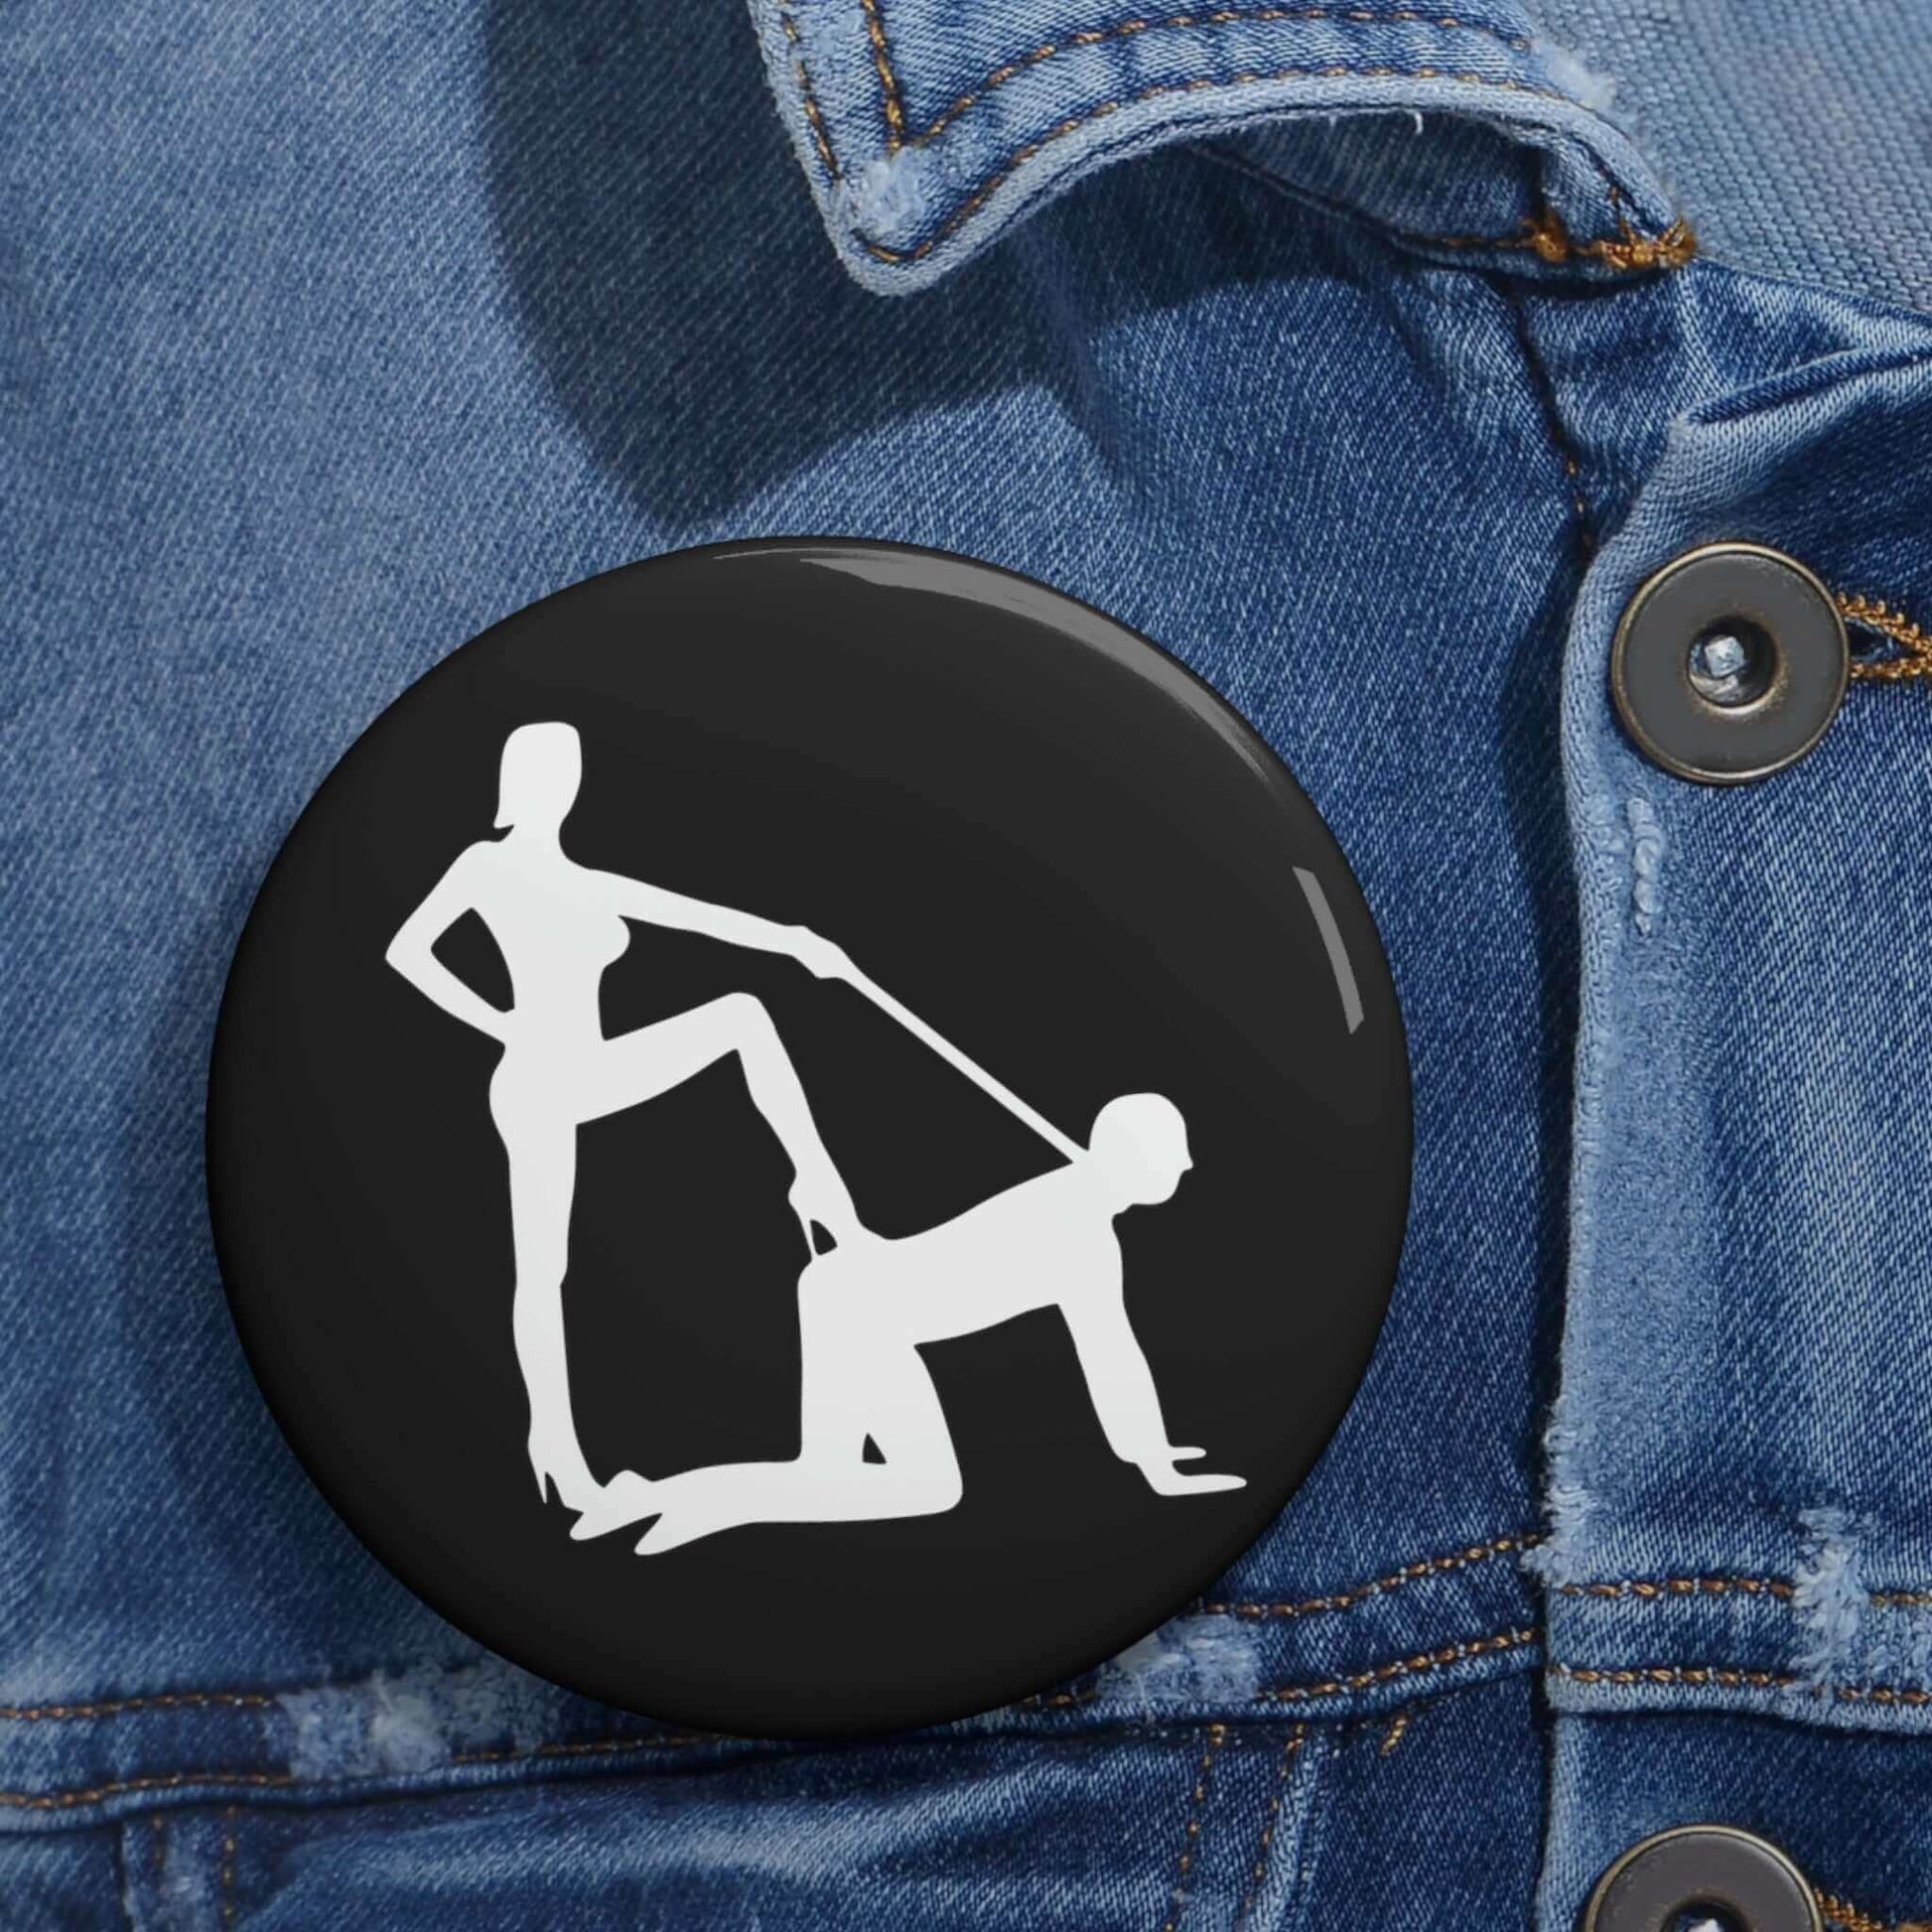 Pin-back button with silhouette image of a man on his hands and knees and a dominatrix holding his leash.